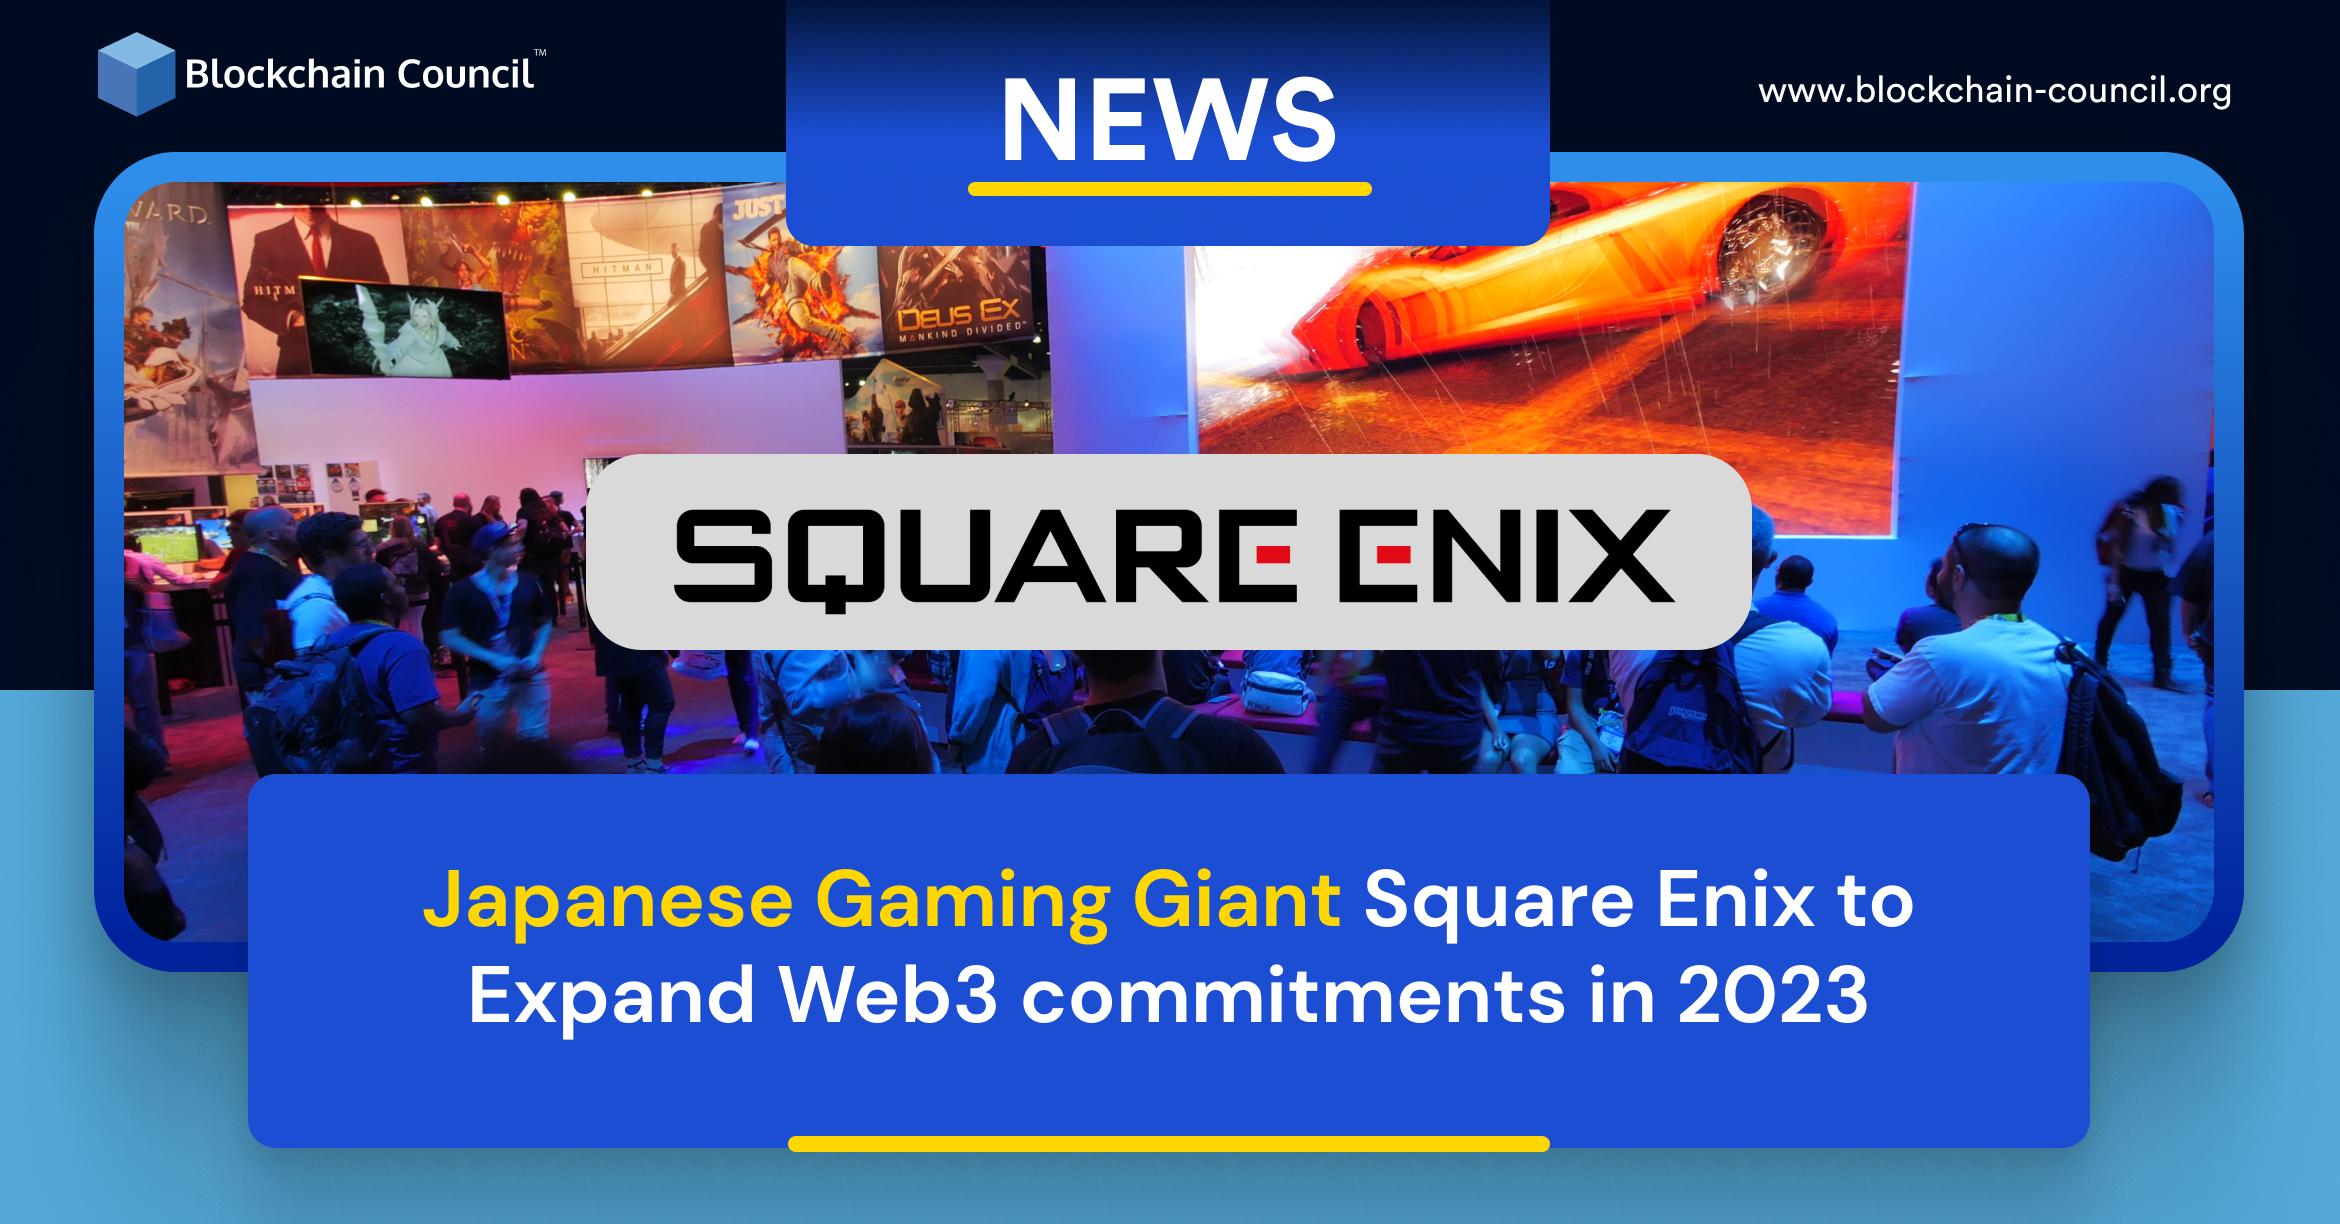 Japanese Gaming Giant Square Enix to Expand Web3 commitments in 2023